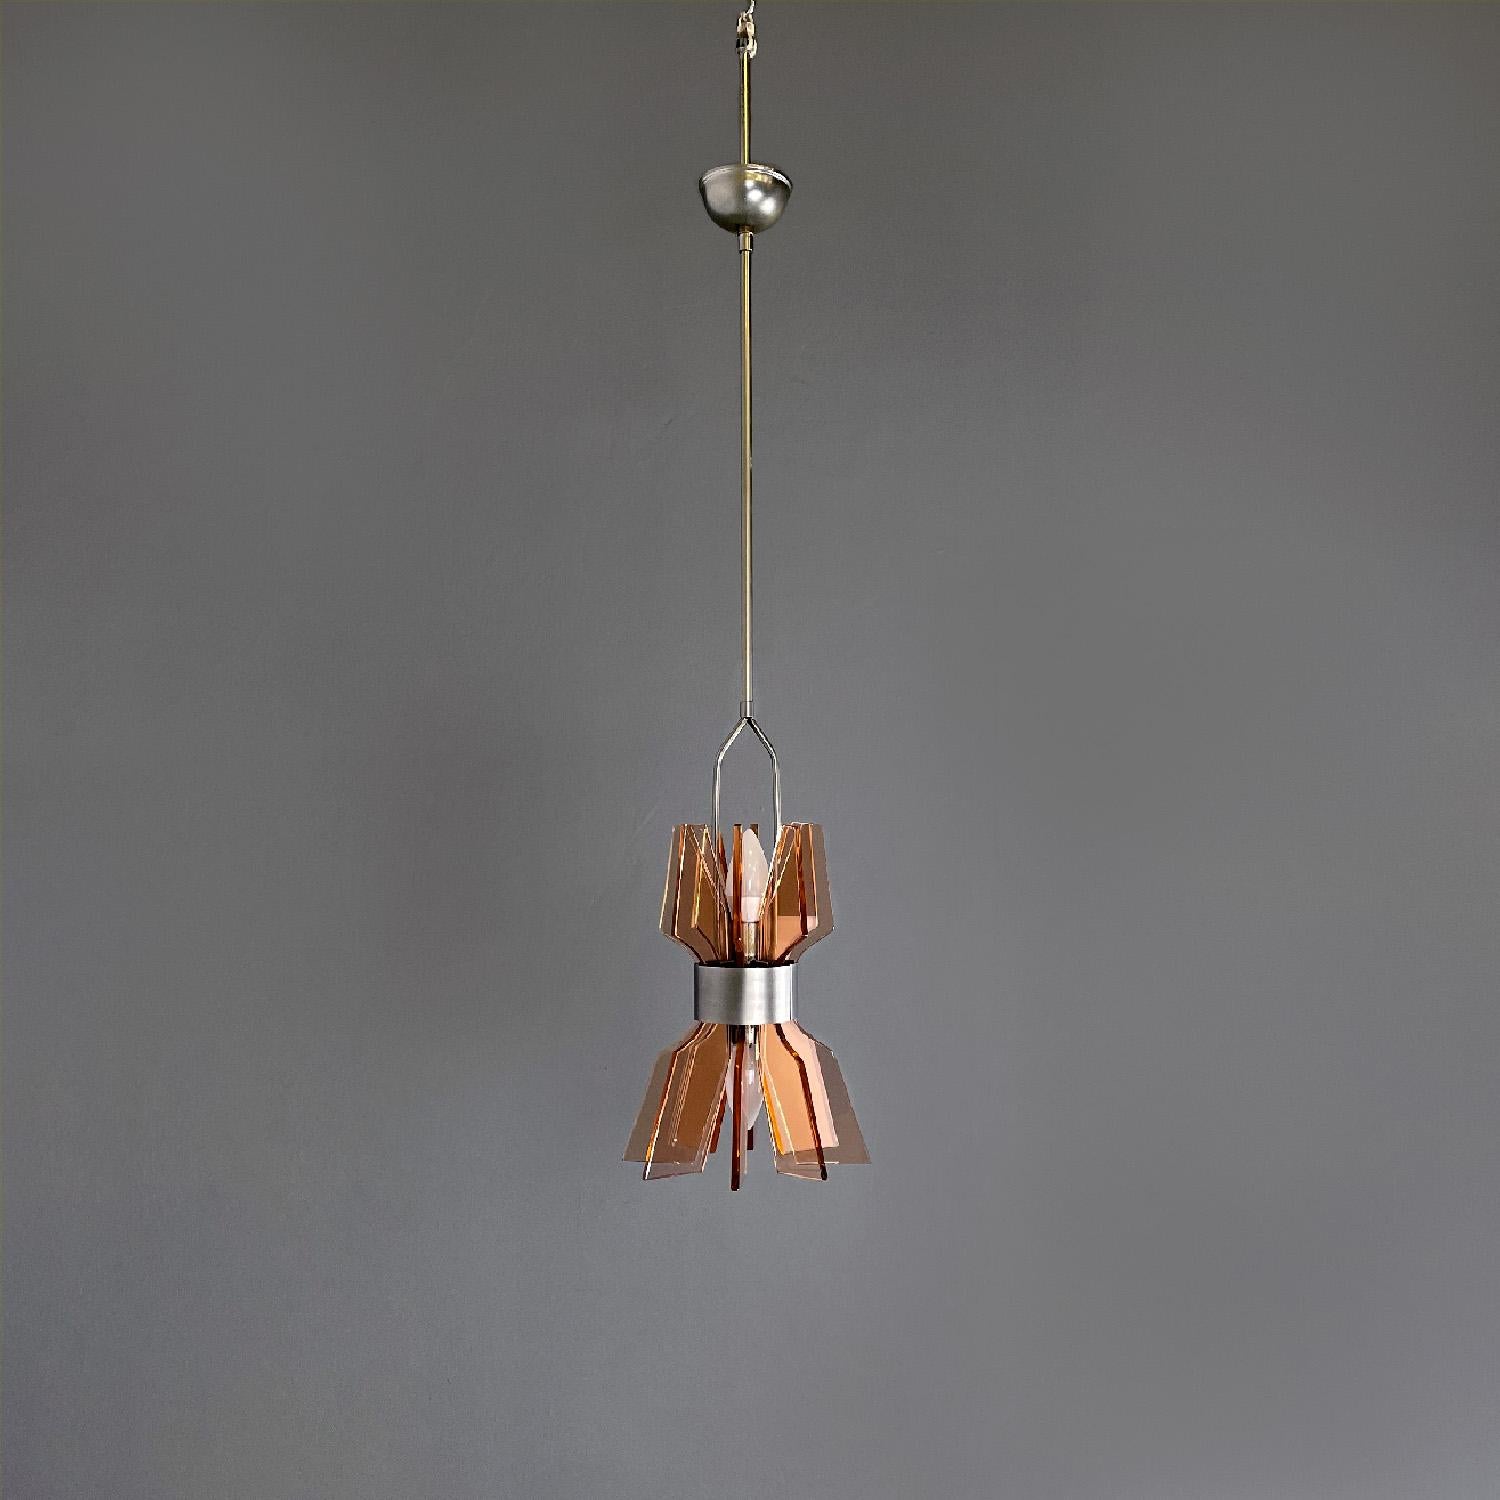 Italian mid-century modern chandelier in peach pink glass and metal, 1960s
Round base chandelier. The diffuser is made up of eight peach-pink geometric glass sheets that narrow in the center and are wrapped in a metal band. Inside are the two light